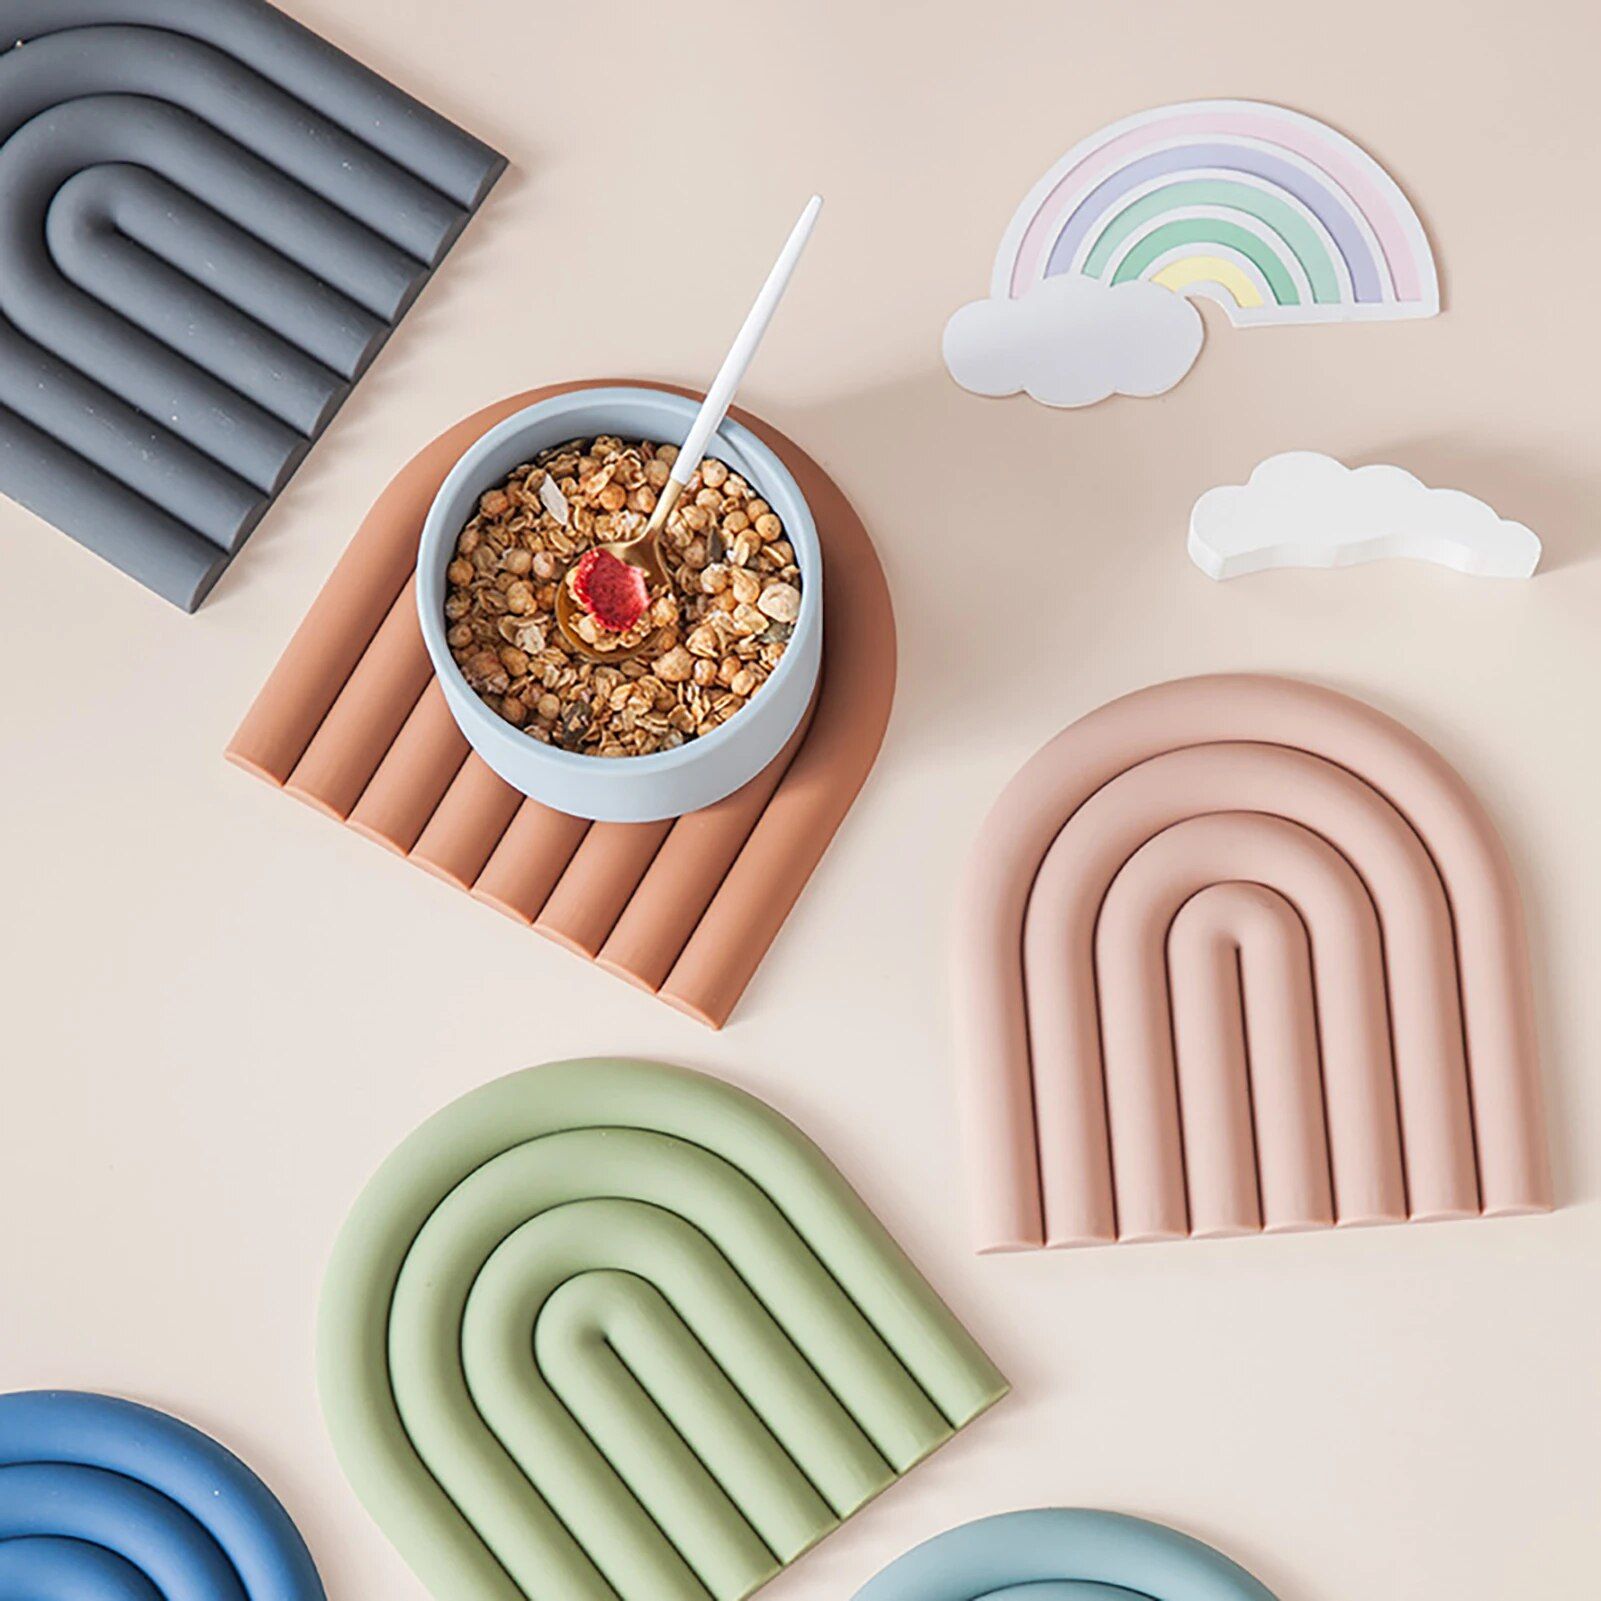 Colorful Silicone Trivet Mats - Round Multipurpose Hot Pads & Spoon Rests 